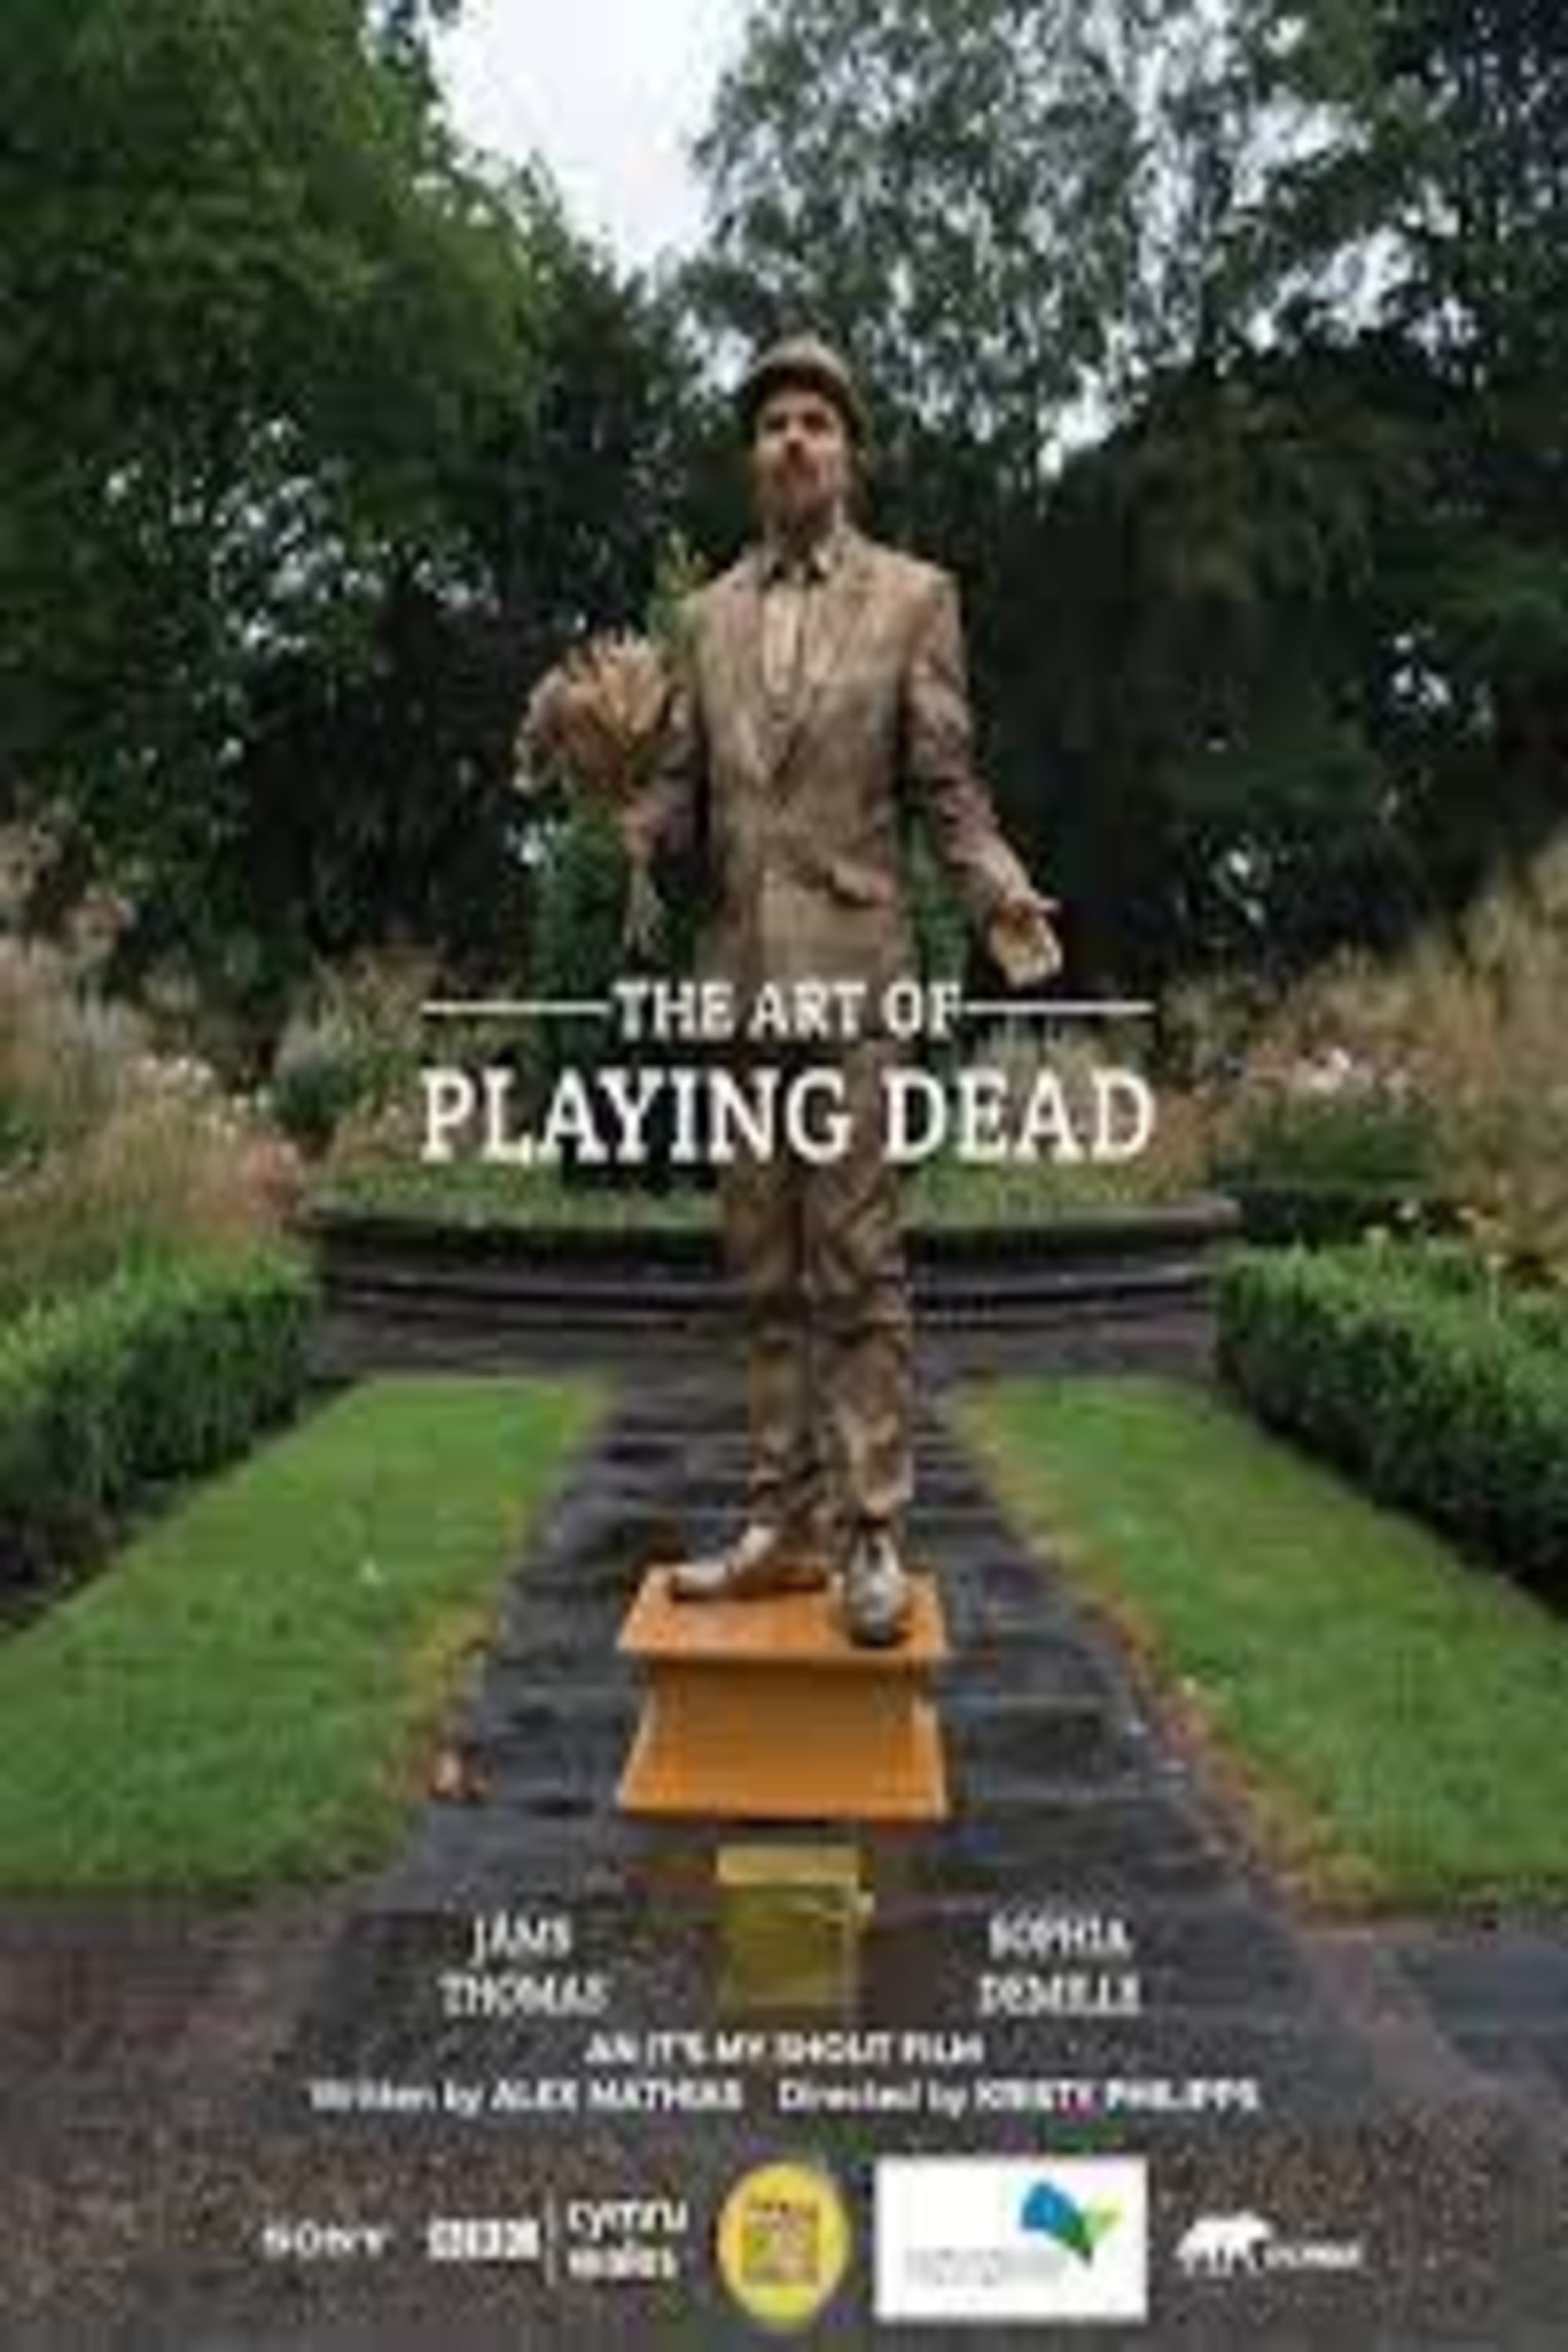 The Art of Playing Dead